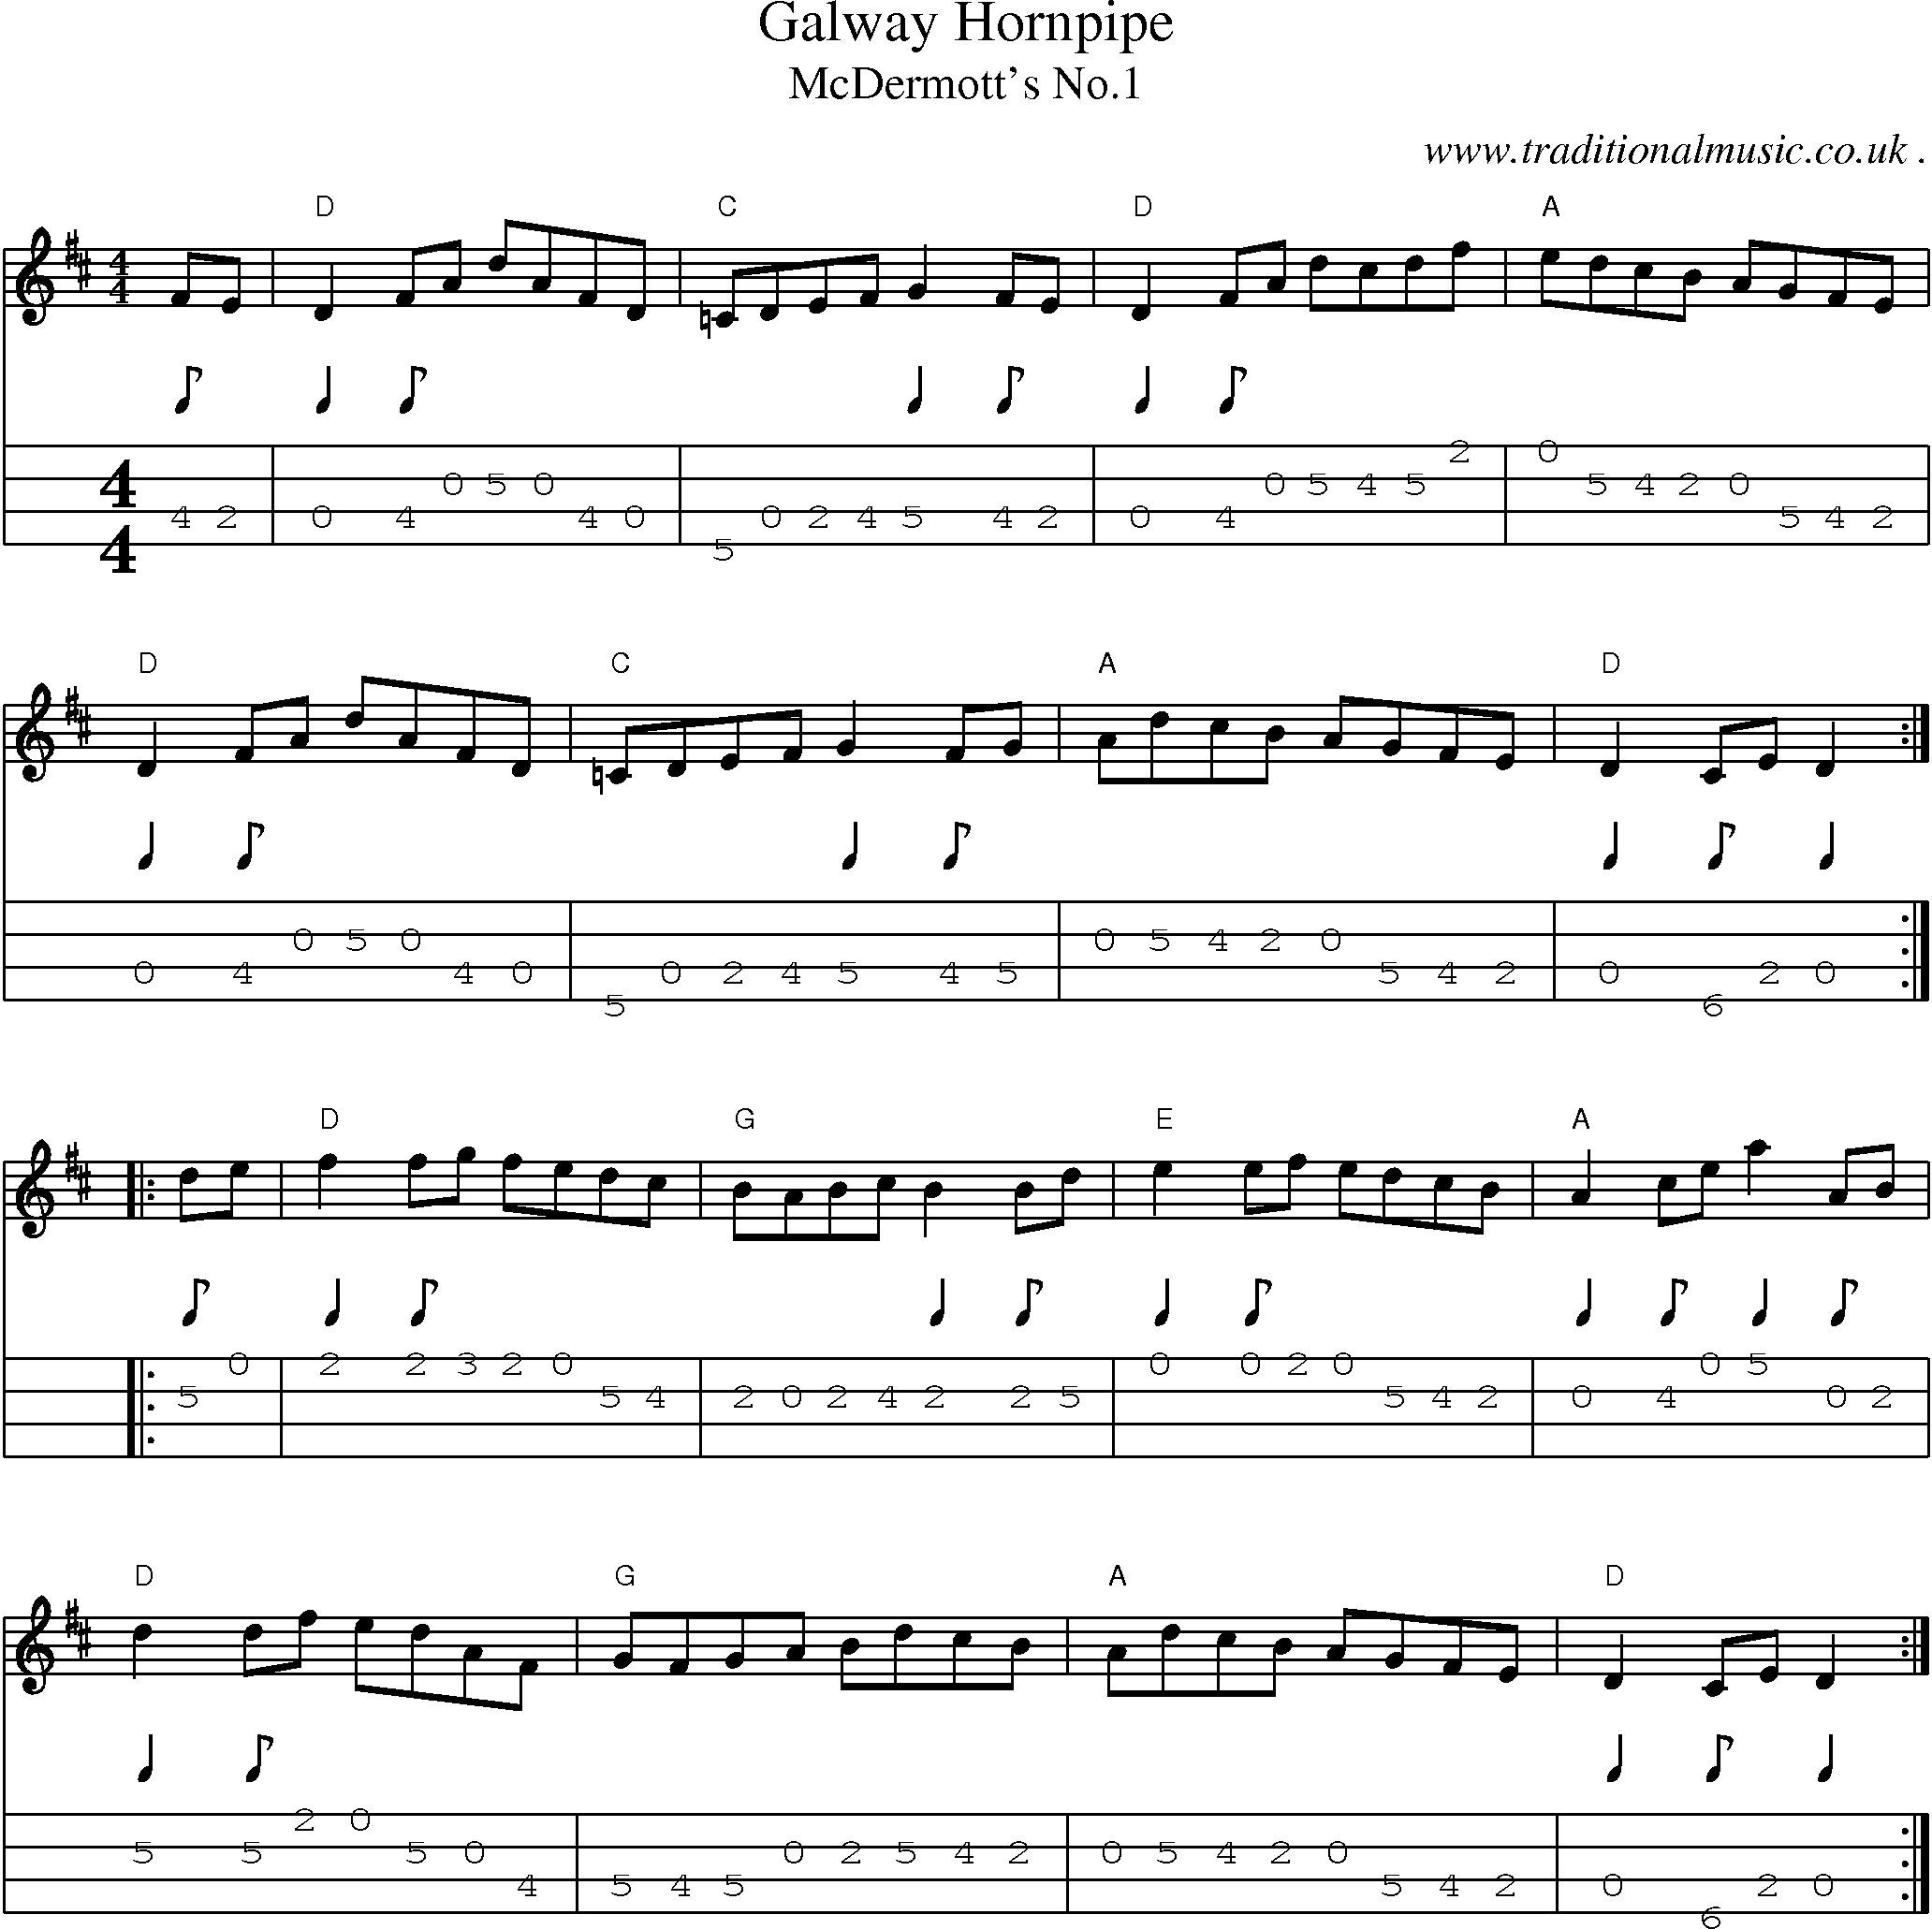 Music Score and Guitar Tabs for Galway Hornpipe